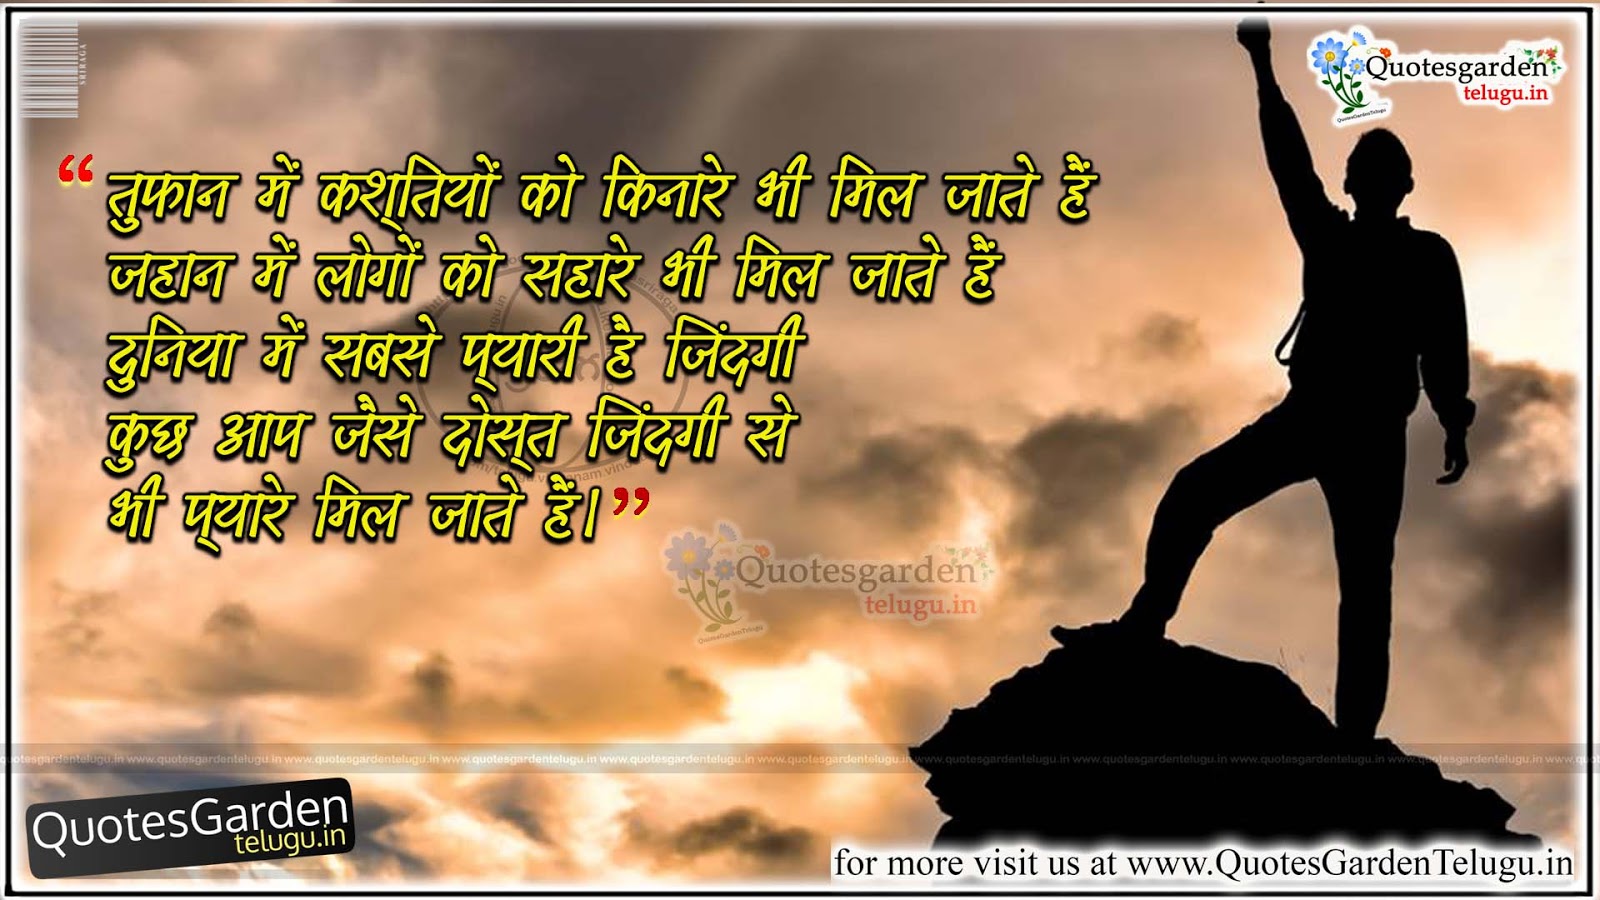 Best Friendship Quotes in Hindi images sms messages | QUOTES GARDEN